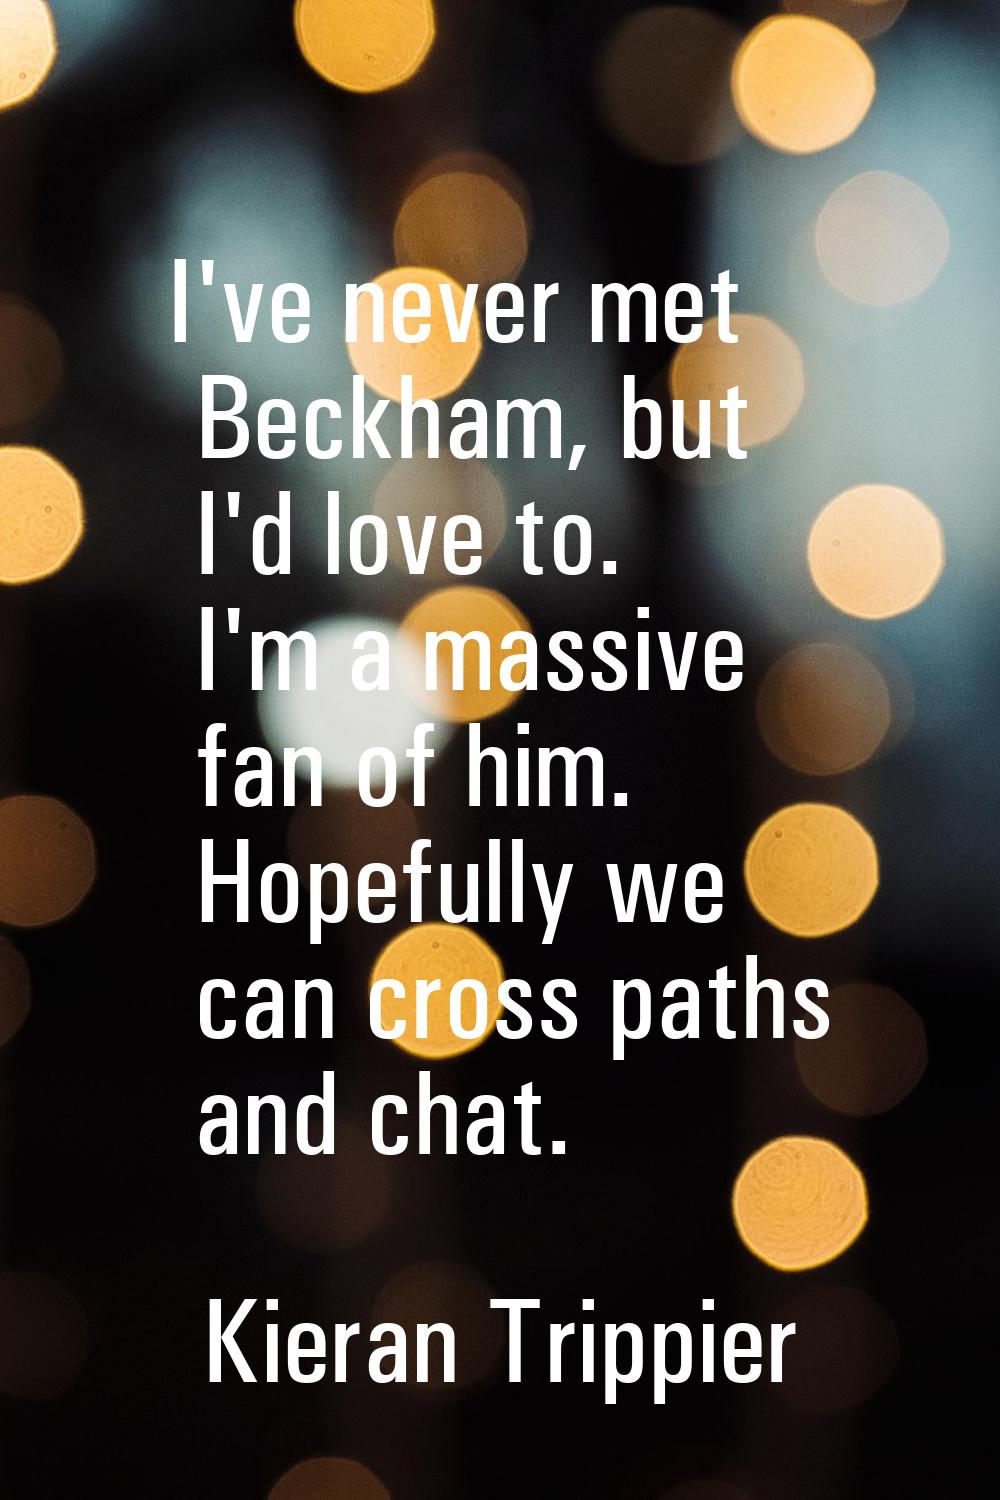 I've never met Beckham, but I'd love to. I'm a massive fan of him. Hopefully we can cross paths and